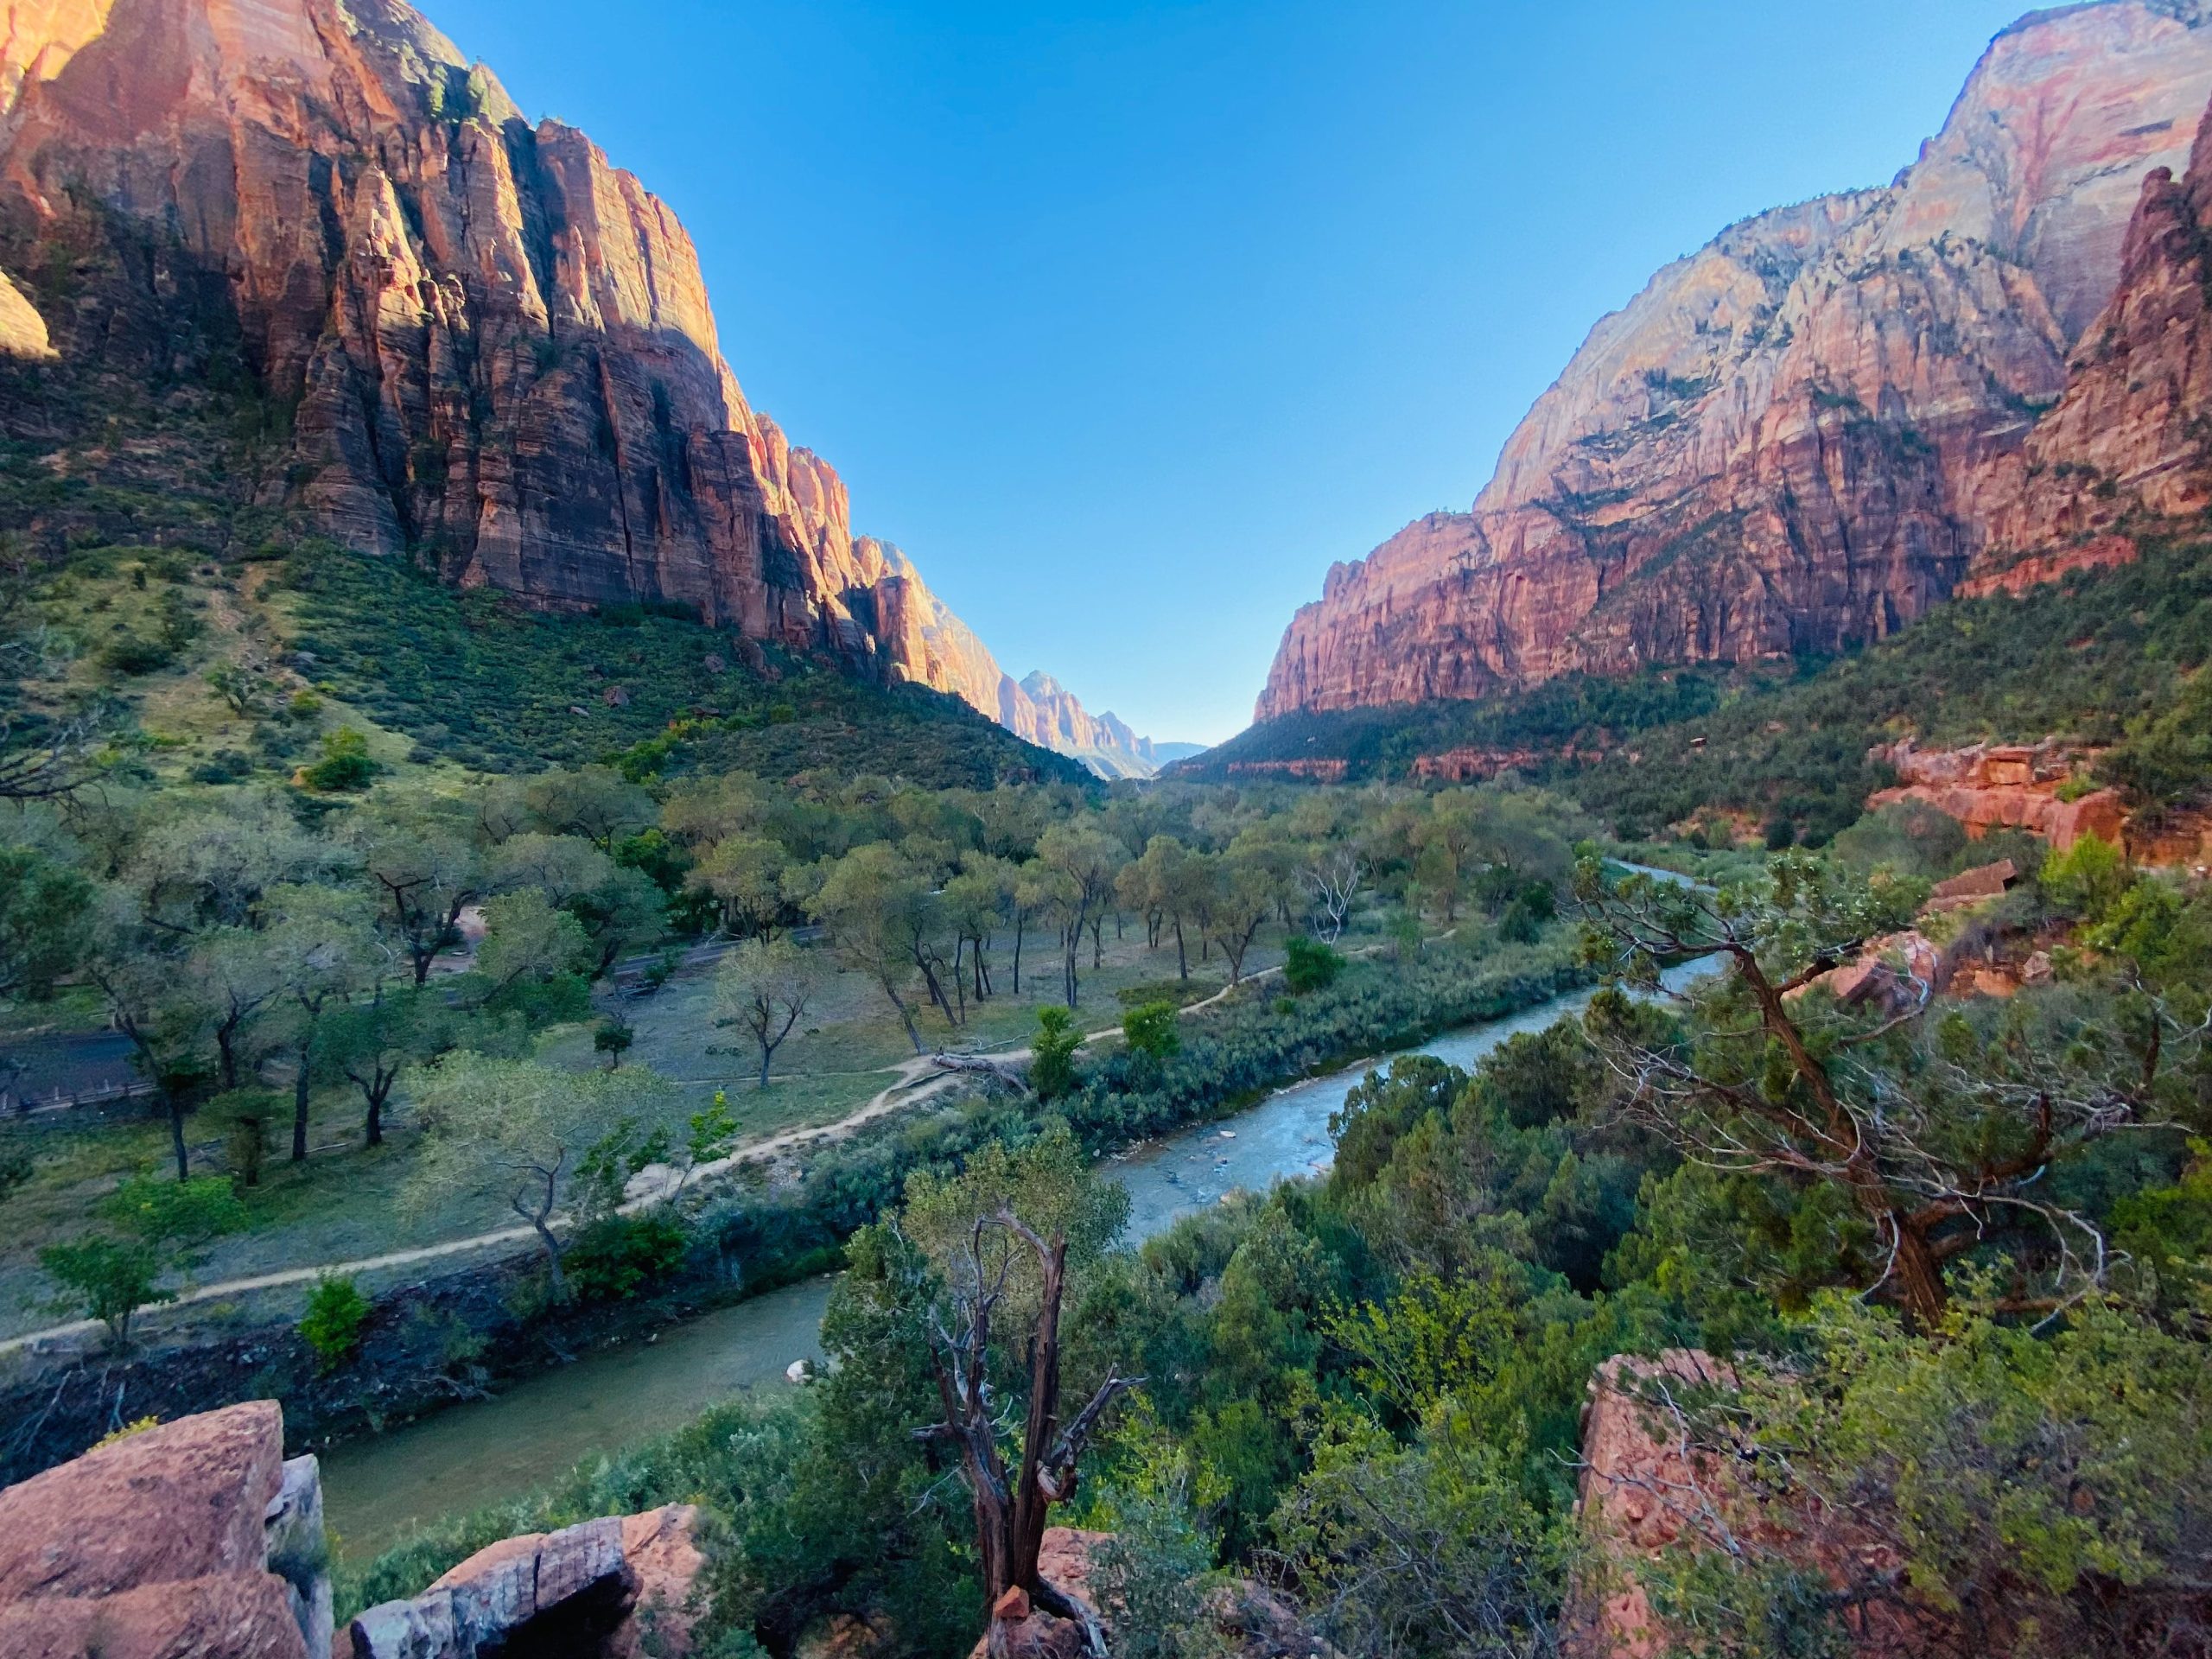 Luxury Hotels Near Zion National Park: Your Gateway to Unparalleled Comfort and Adventure